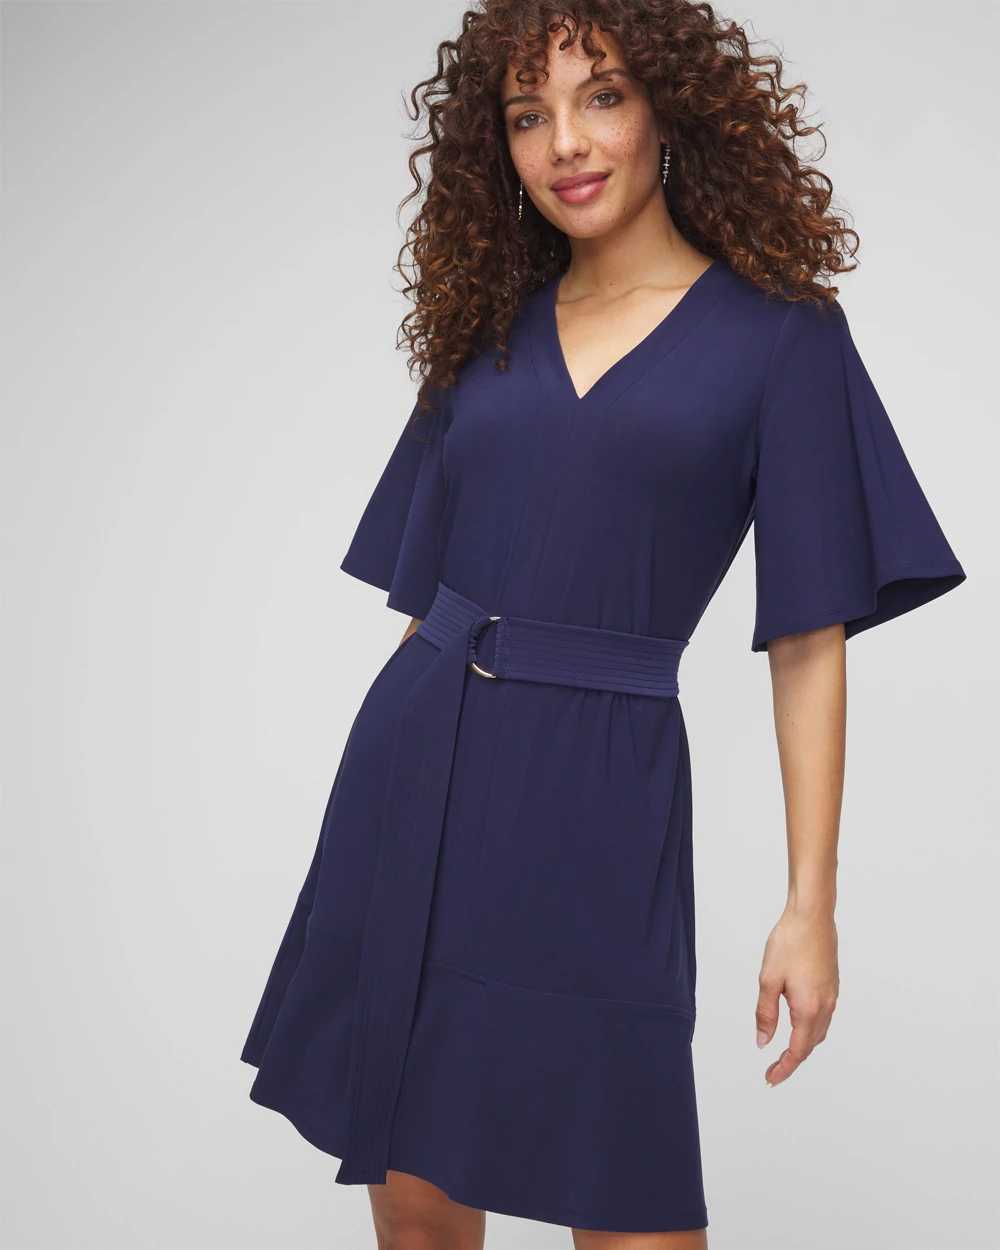 Matte Jersey Belted Kimono Dress click to view larger image.